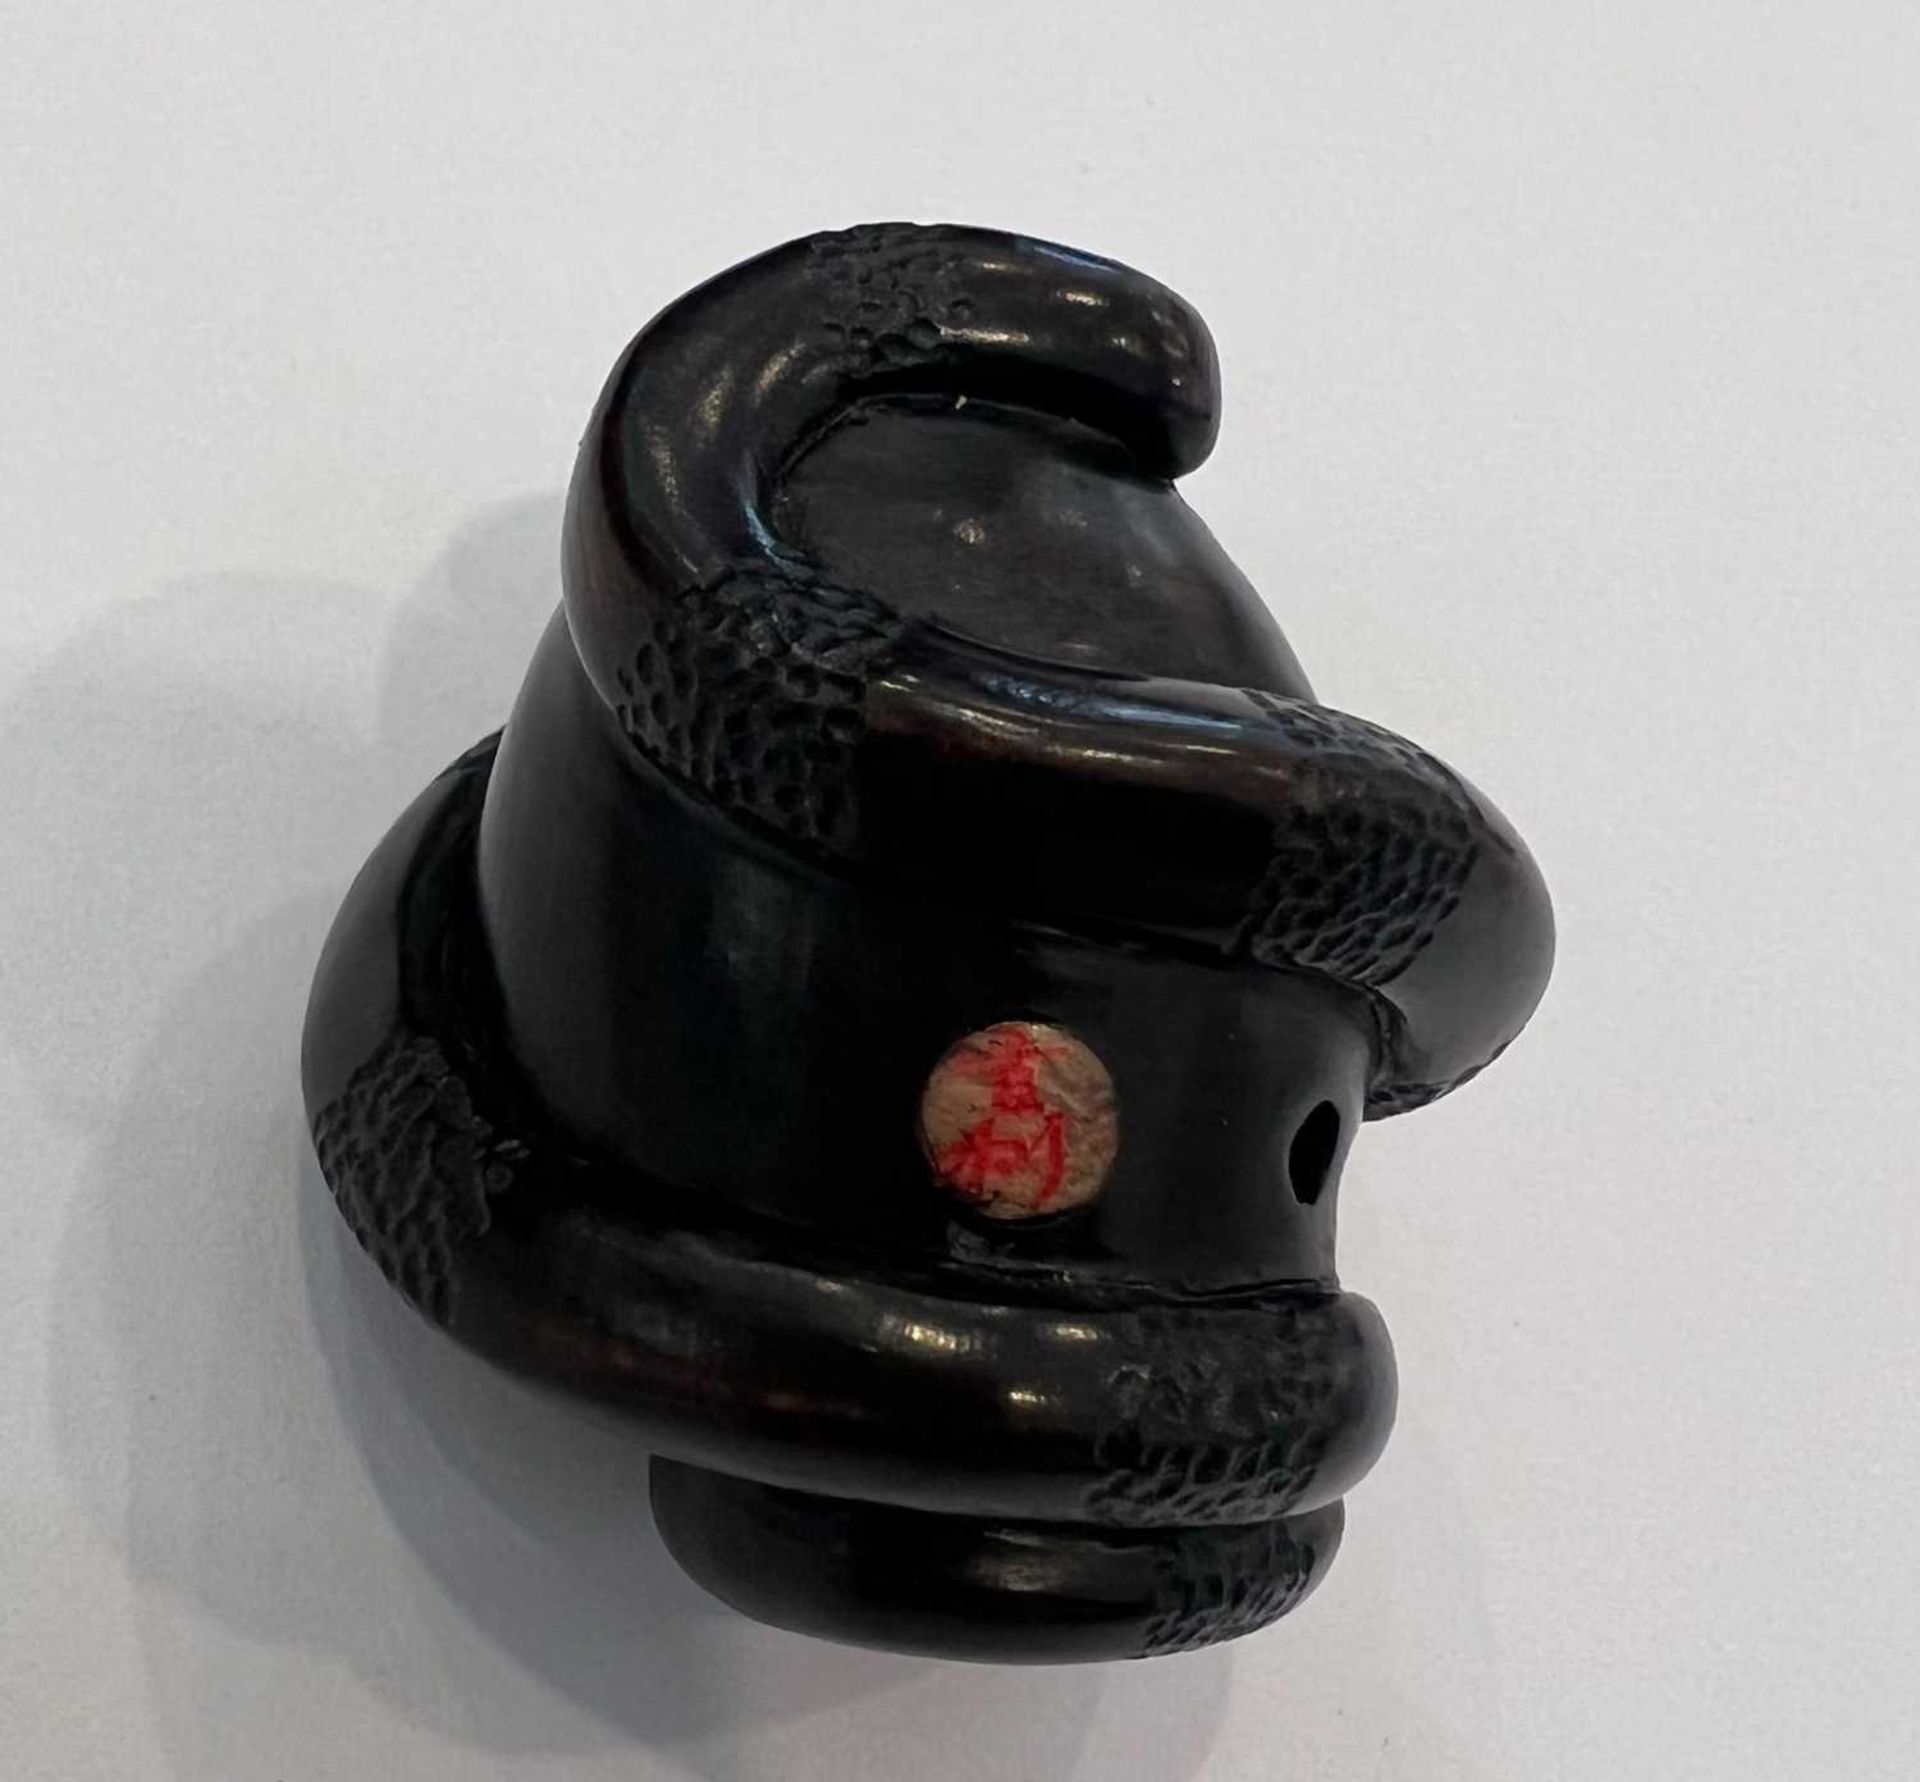 A CARVED WOOD NETSUKE IN THE FORM OF A SNAKE - Image 3 of 4